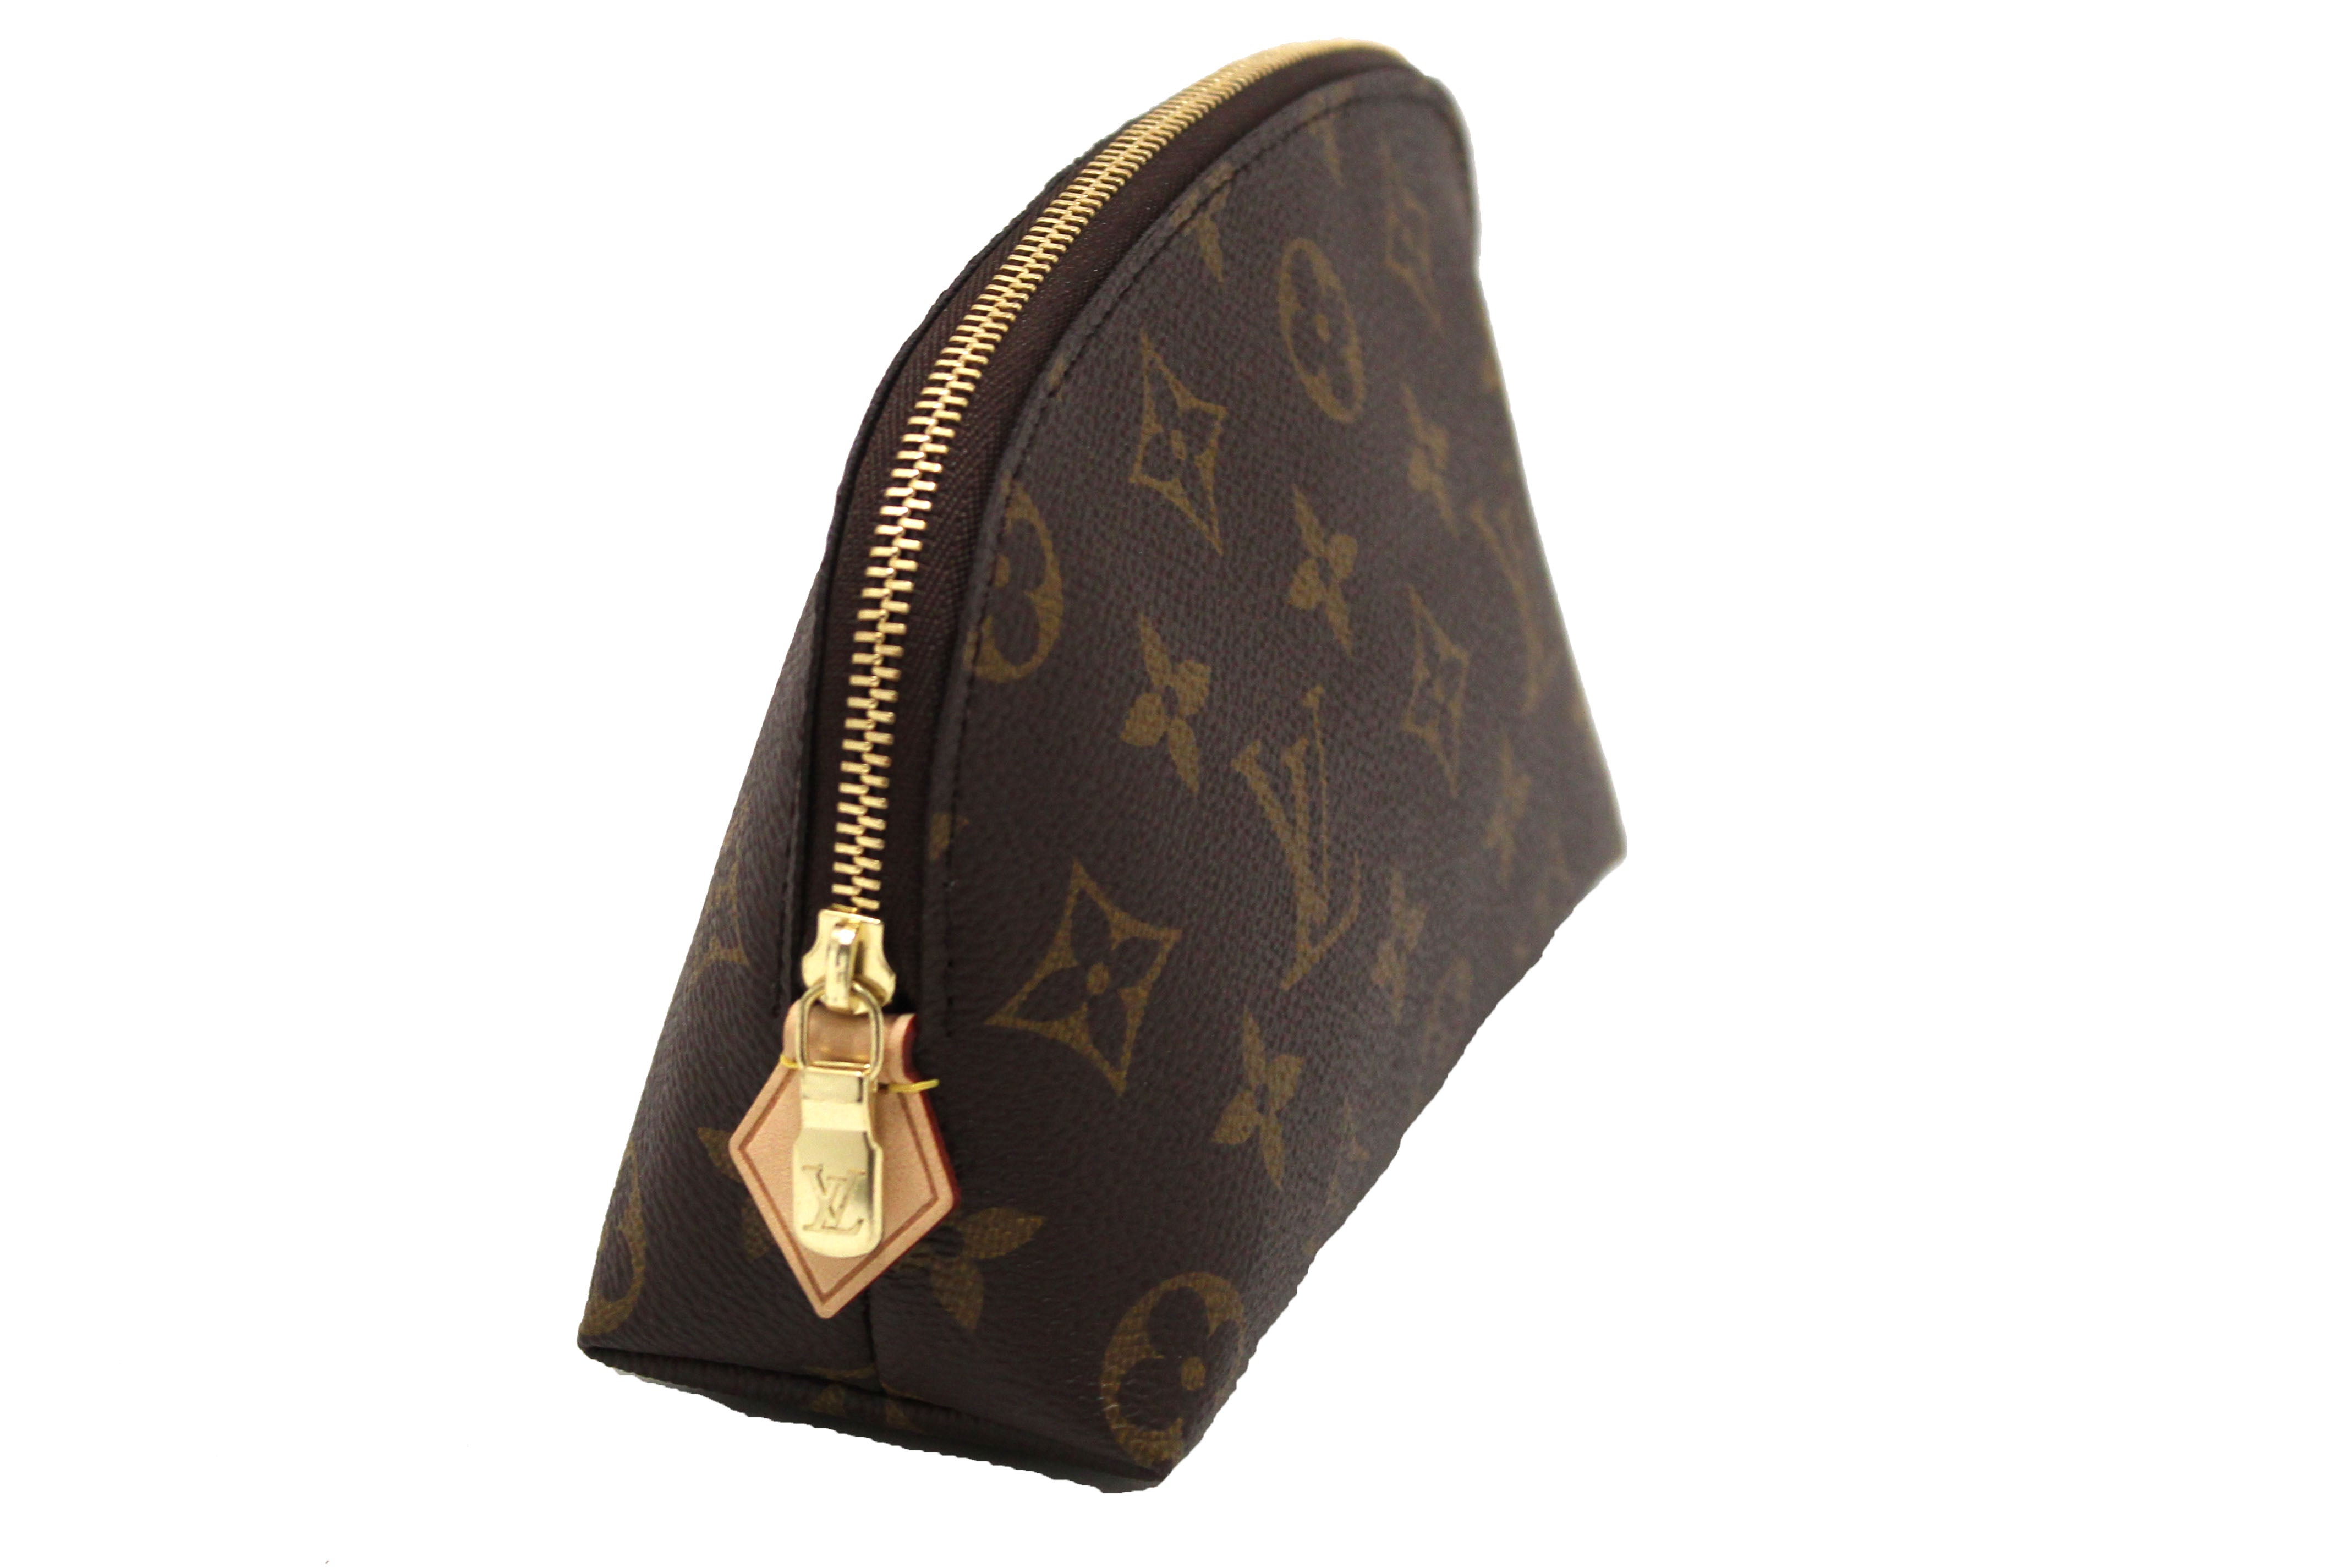 Louis Vuitton Monogram Cosmetic Pouch - Brown Cosmetic Bags